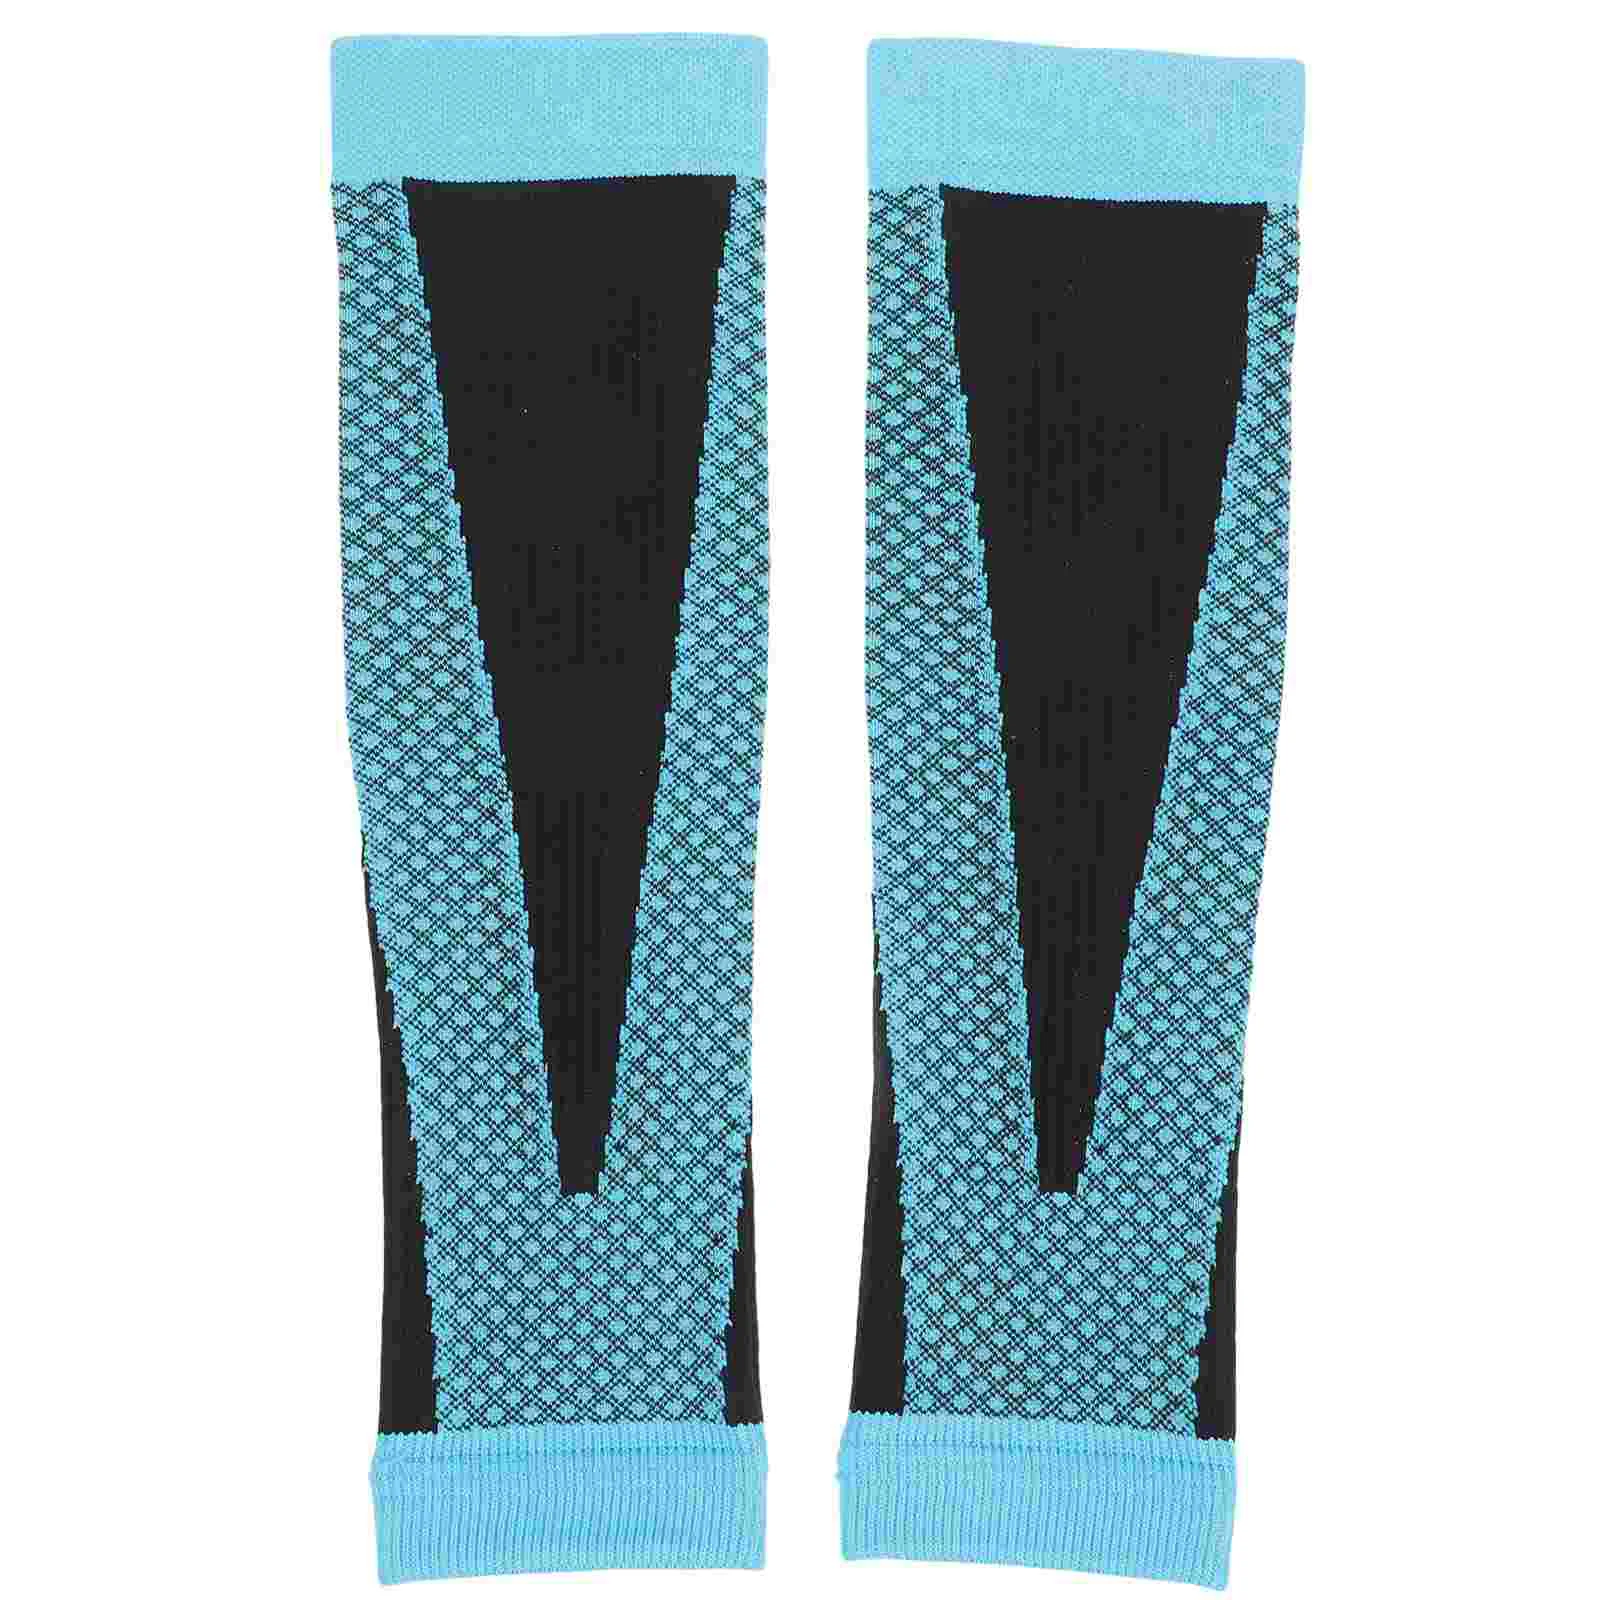 

Leg Sleeve Women Calf Compression Running Sleeves Protective Supplies Basketball Spandex Stockings Warmers Covers